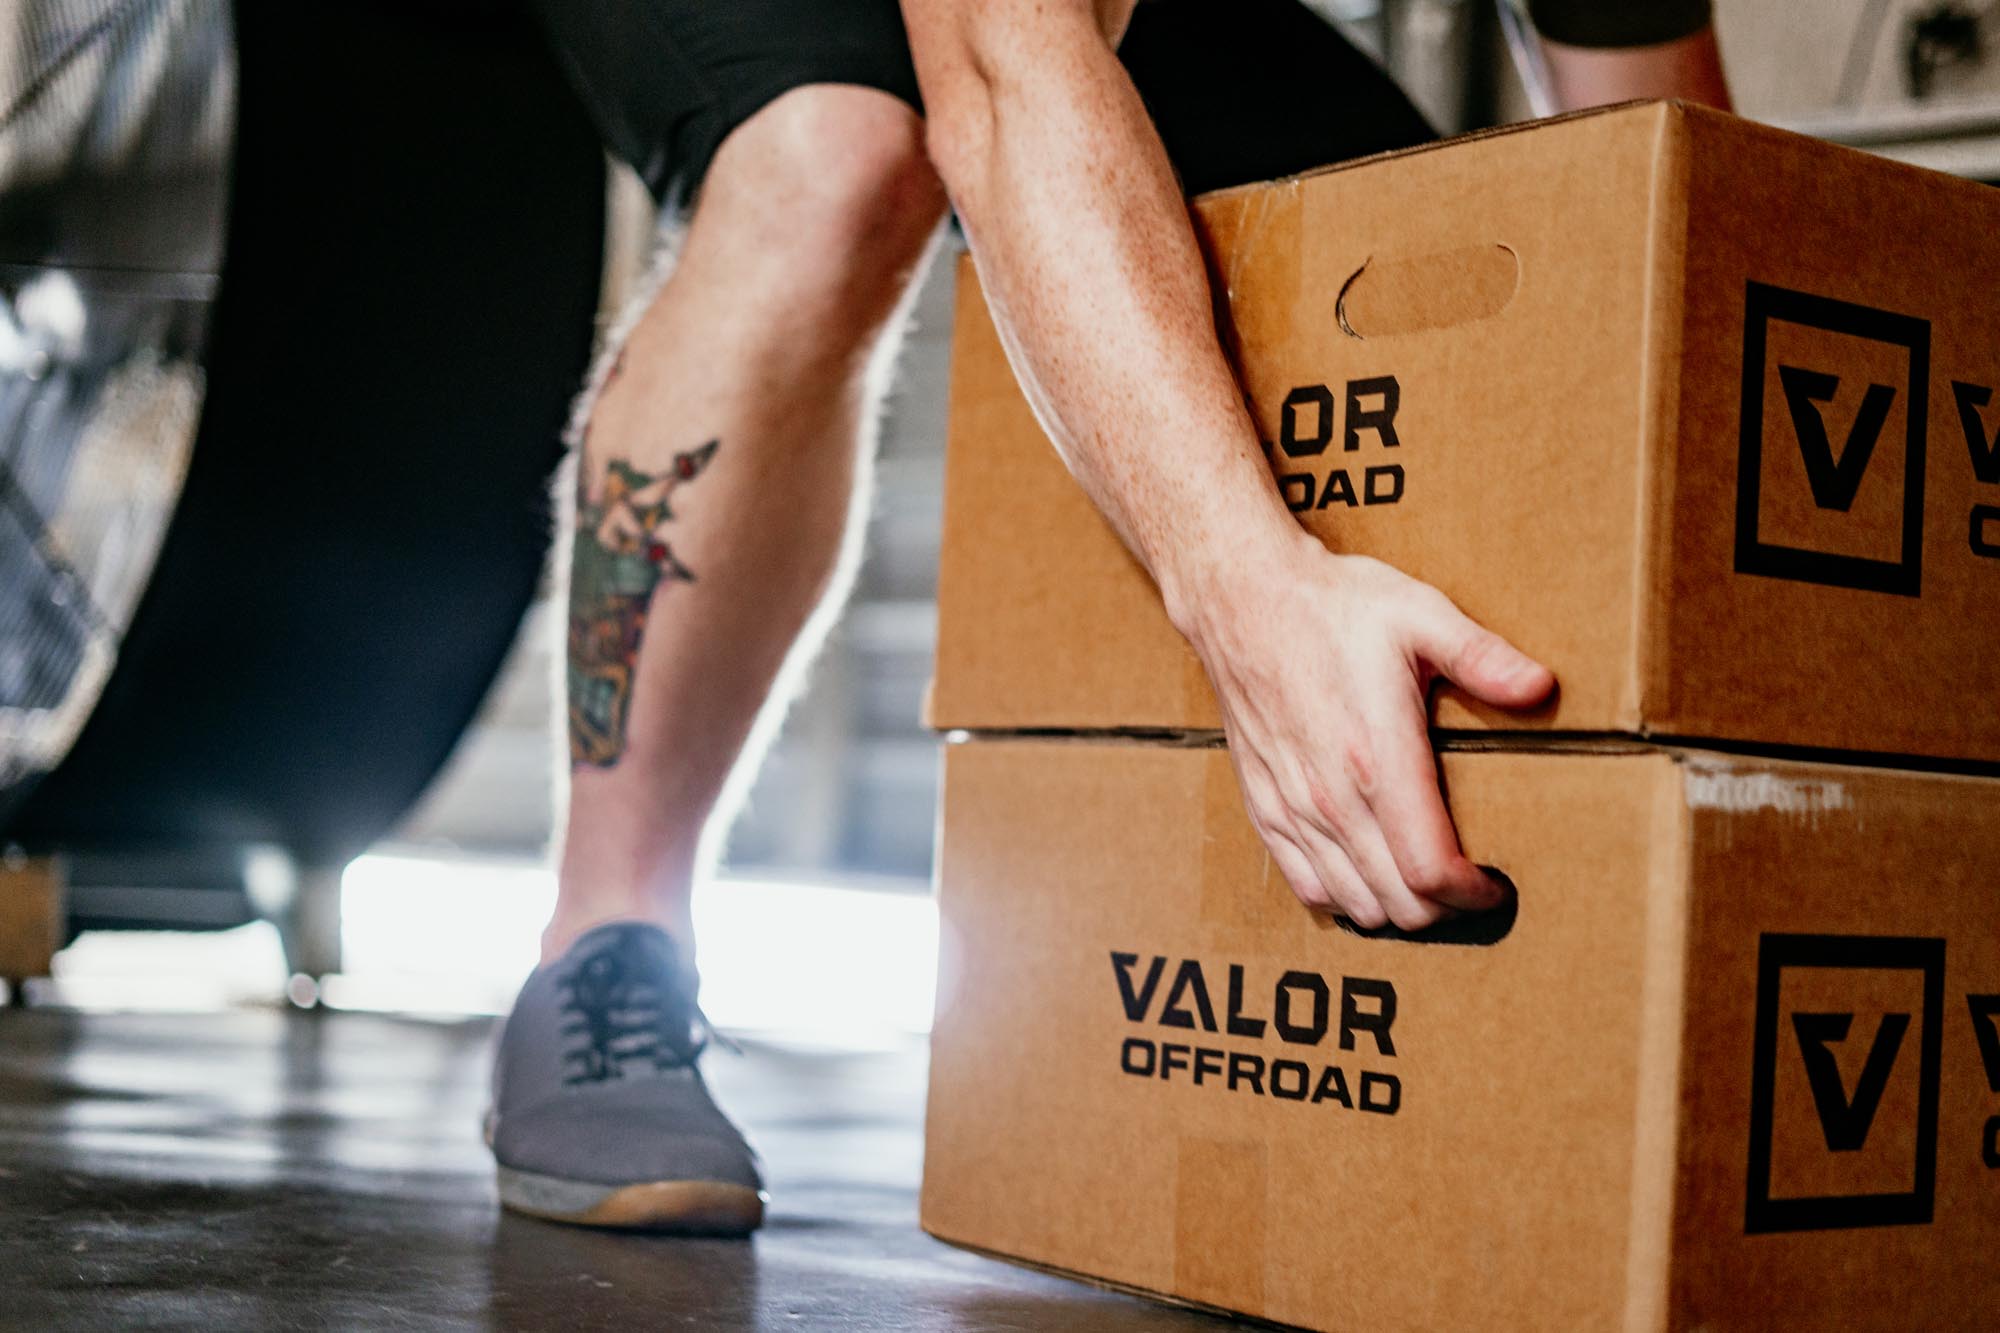 What makes Valor Different